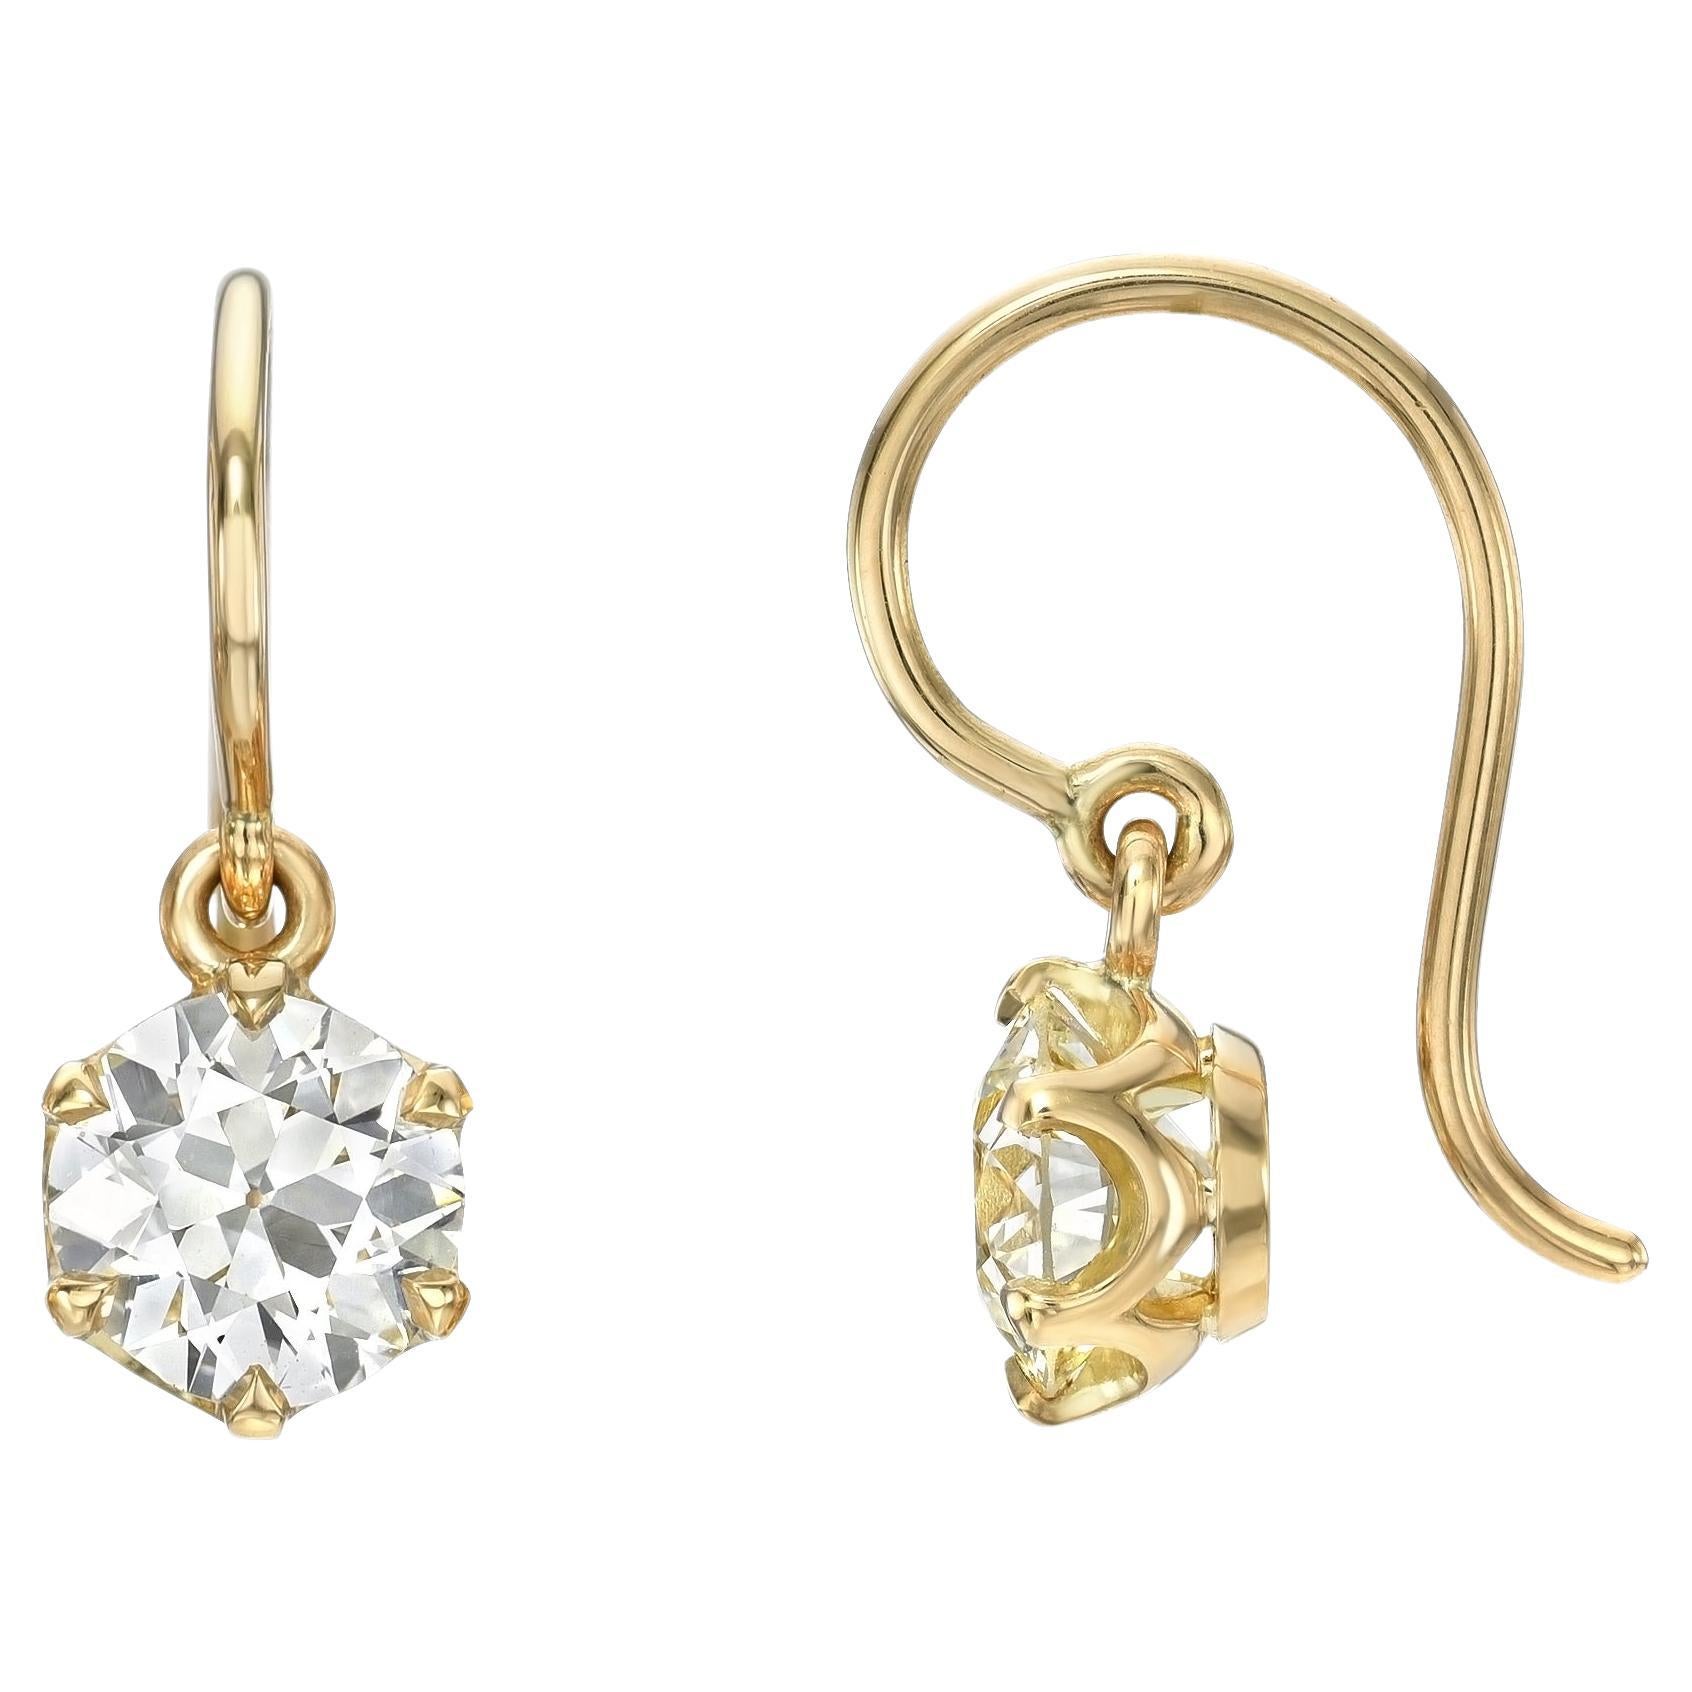 Handcrafted Gia Old European Cut Diamond Drop Earrings by Single Stone For Sale